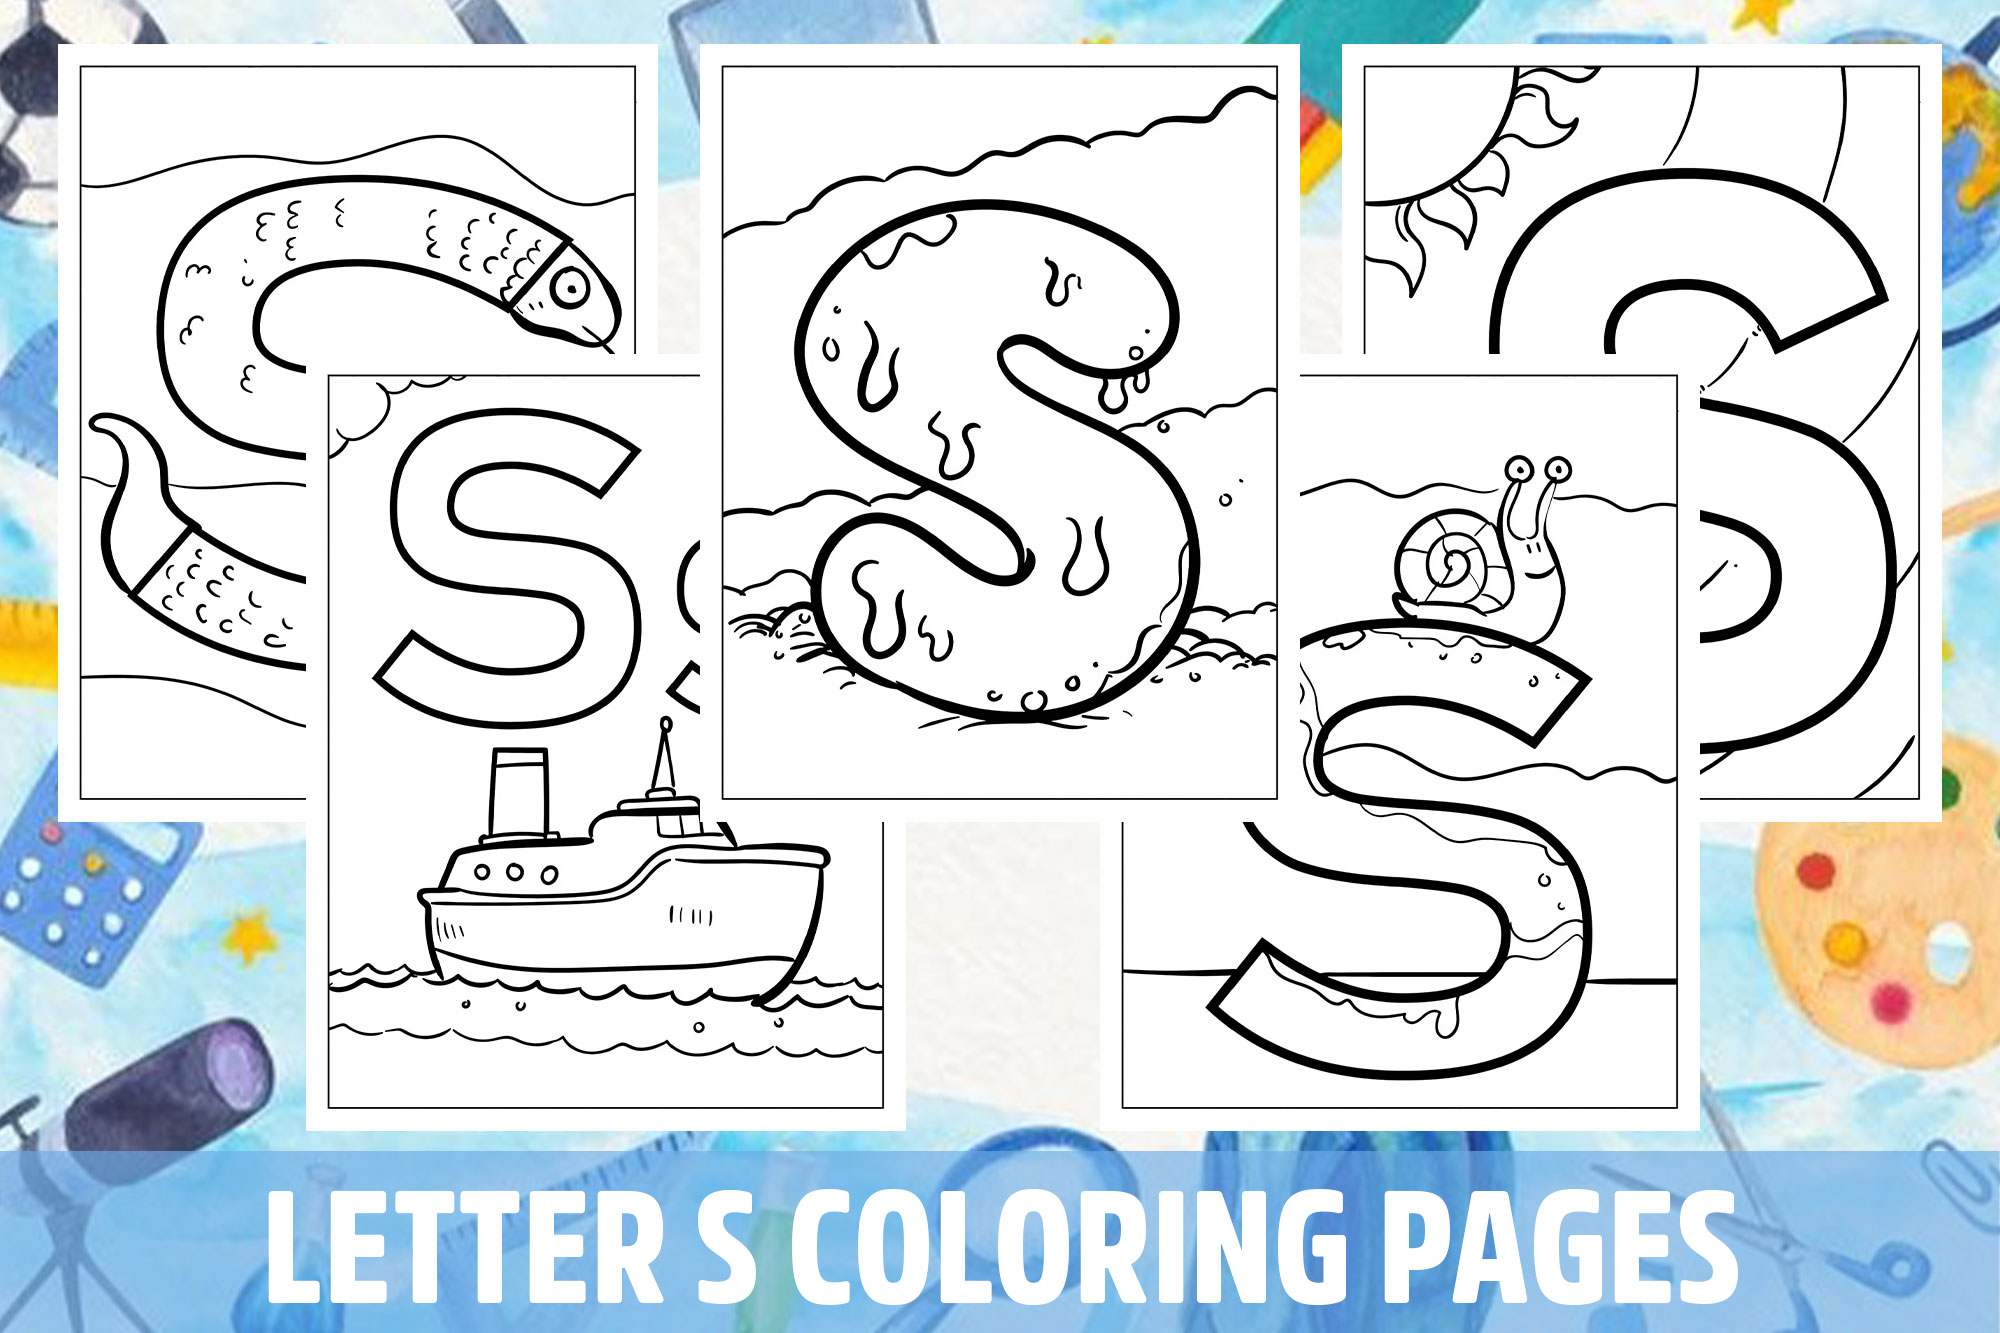 Letter s coloring pages for kids girls boys teens birthday school activity made by teachers